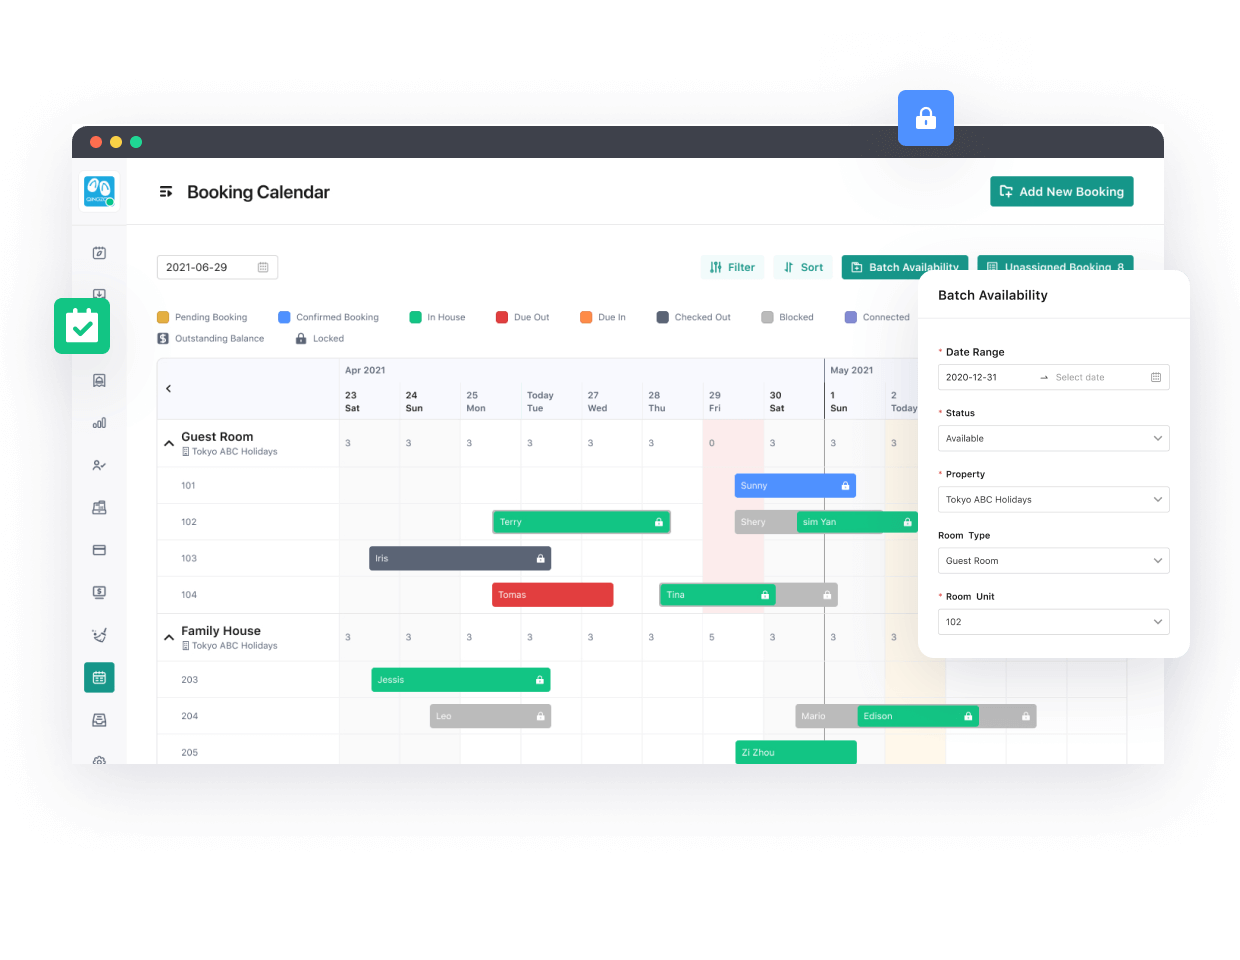 Fully take control of all your bookings from a single calendar